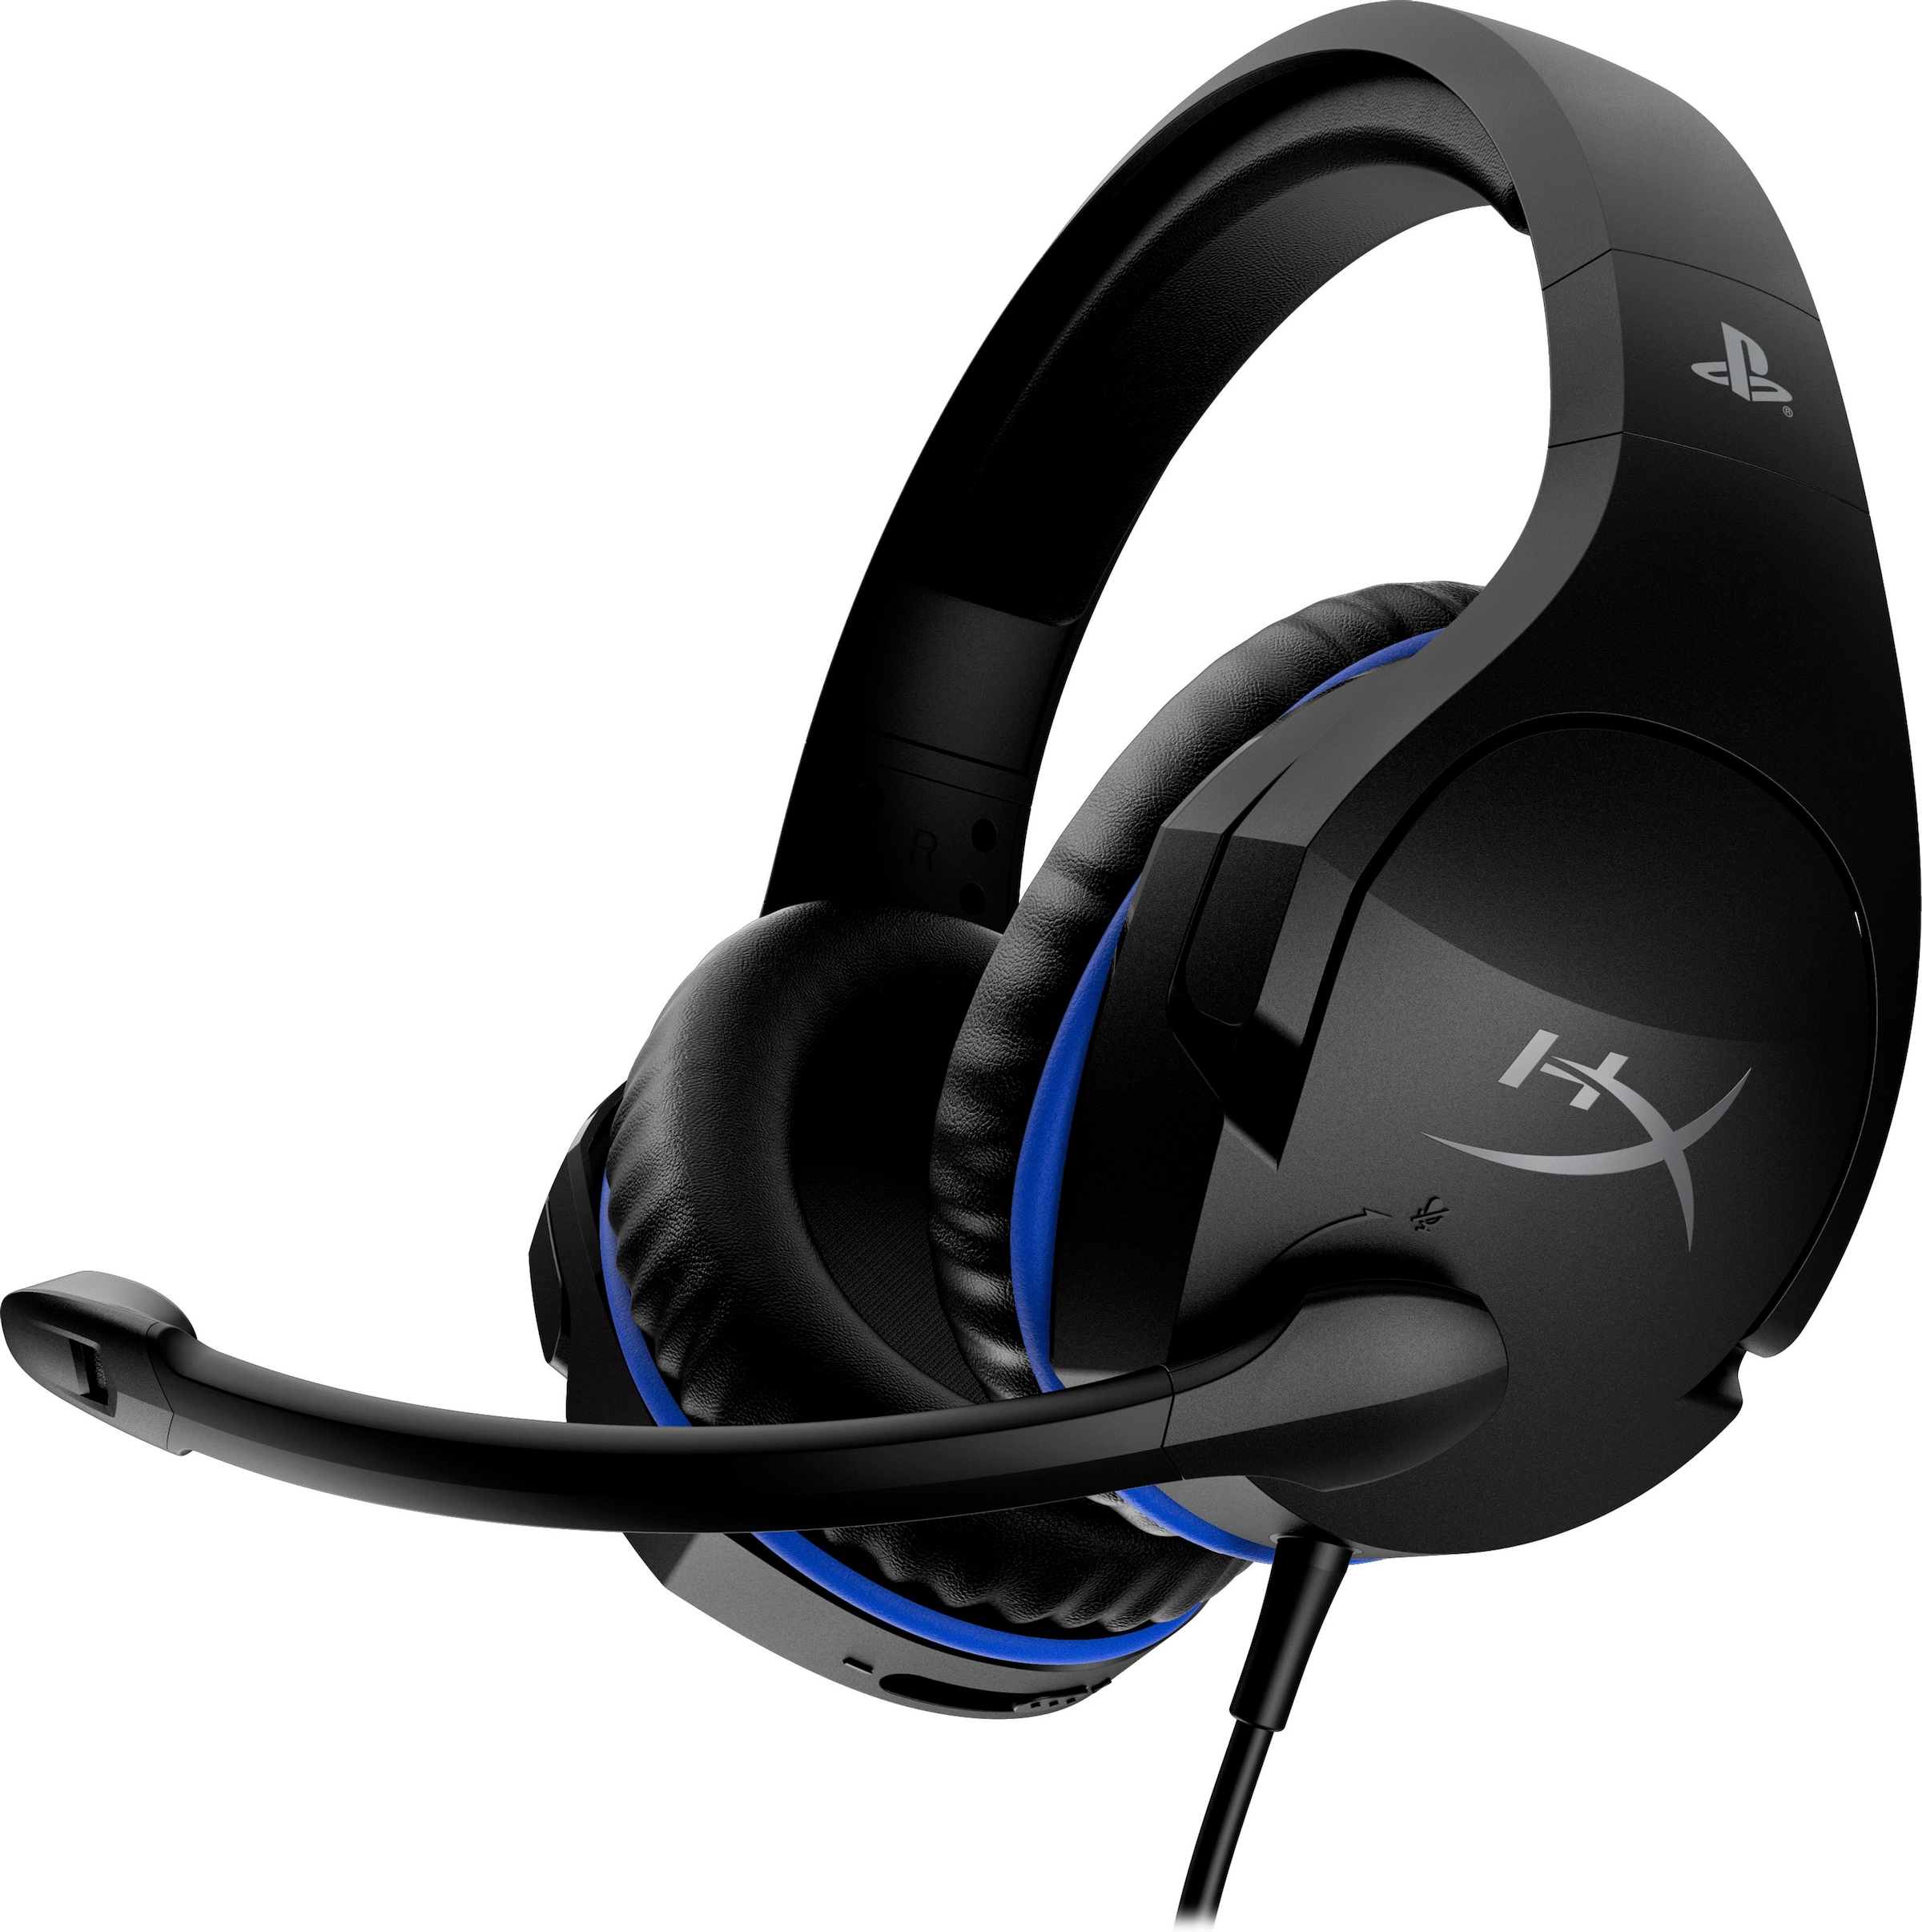 HyperX Gaming-Headset »Cloud Stinger (PS4 bei OTTO abnehmbar jetzt Licensed)«, Mikrofon